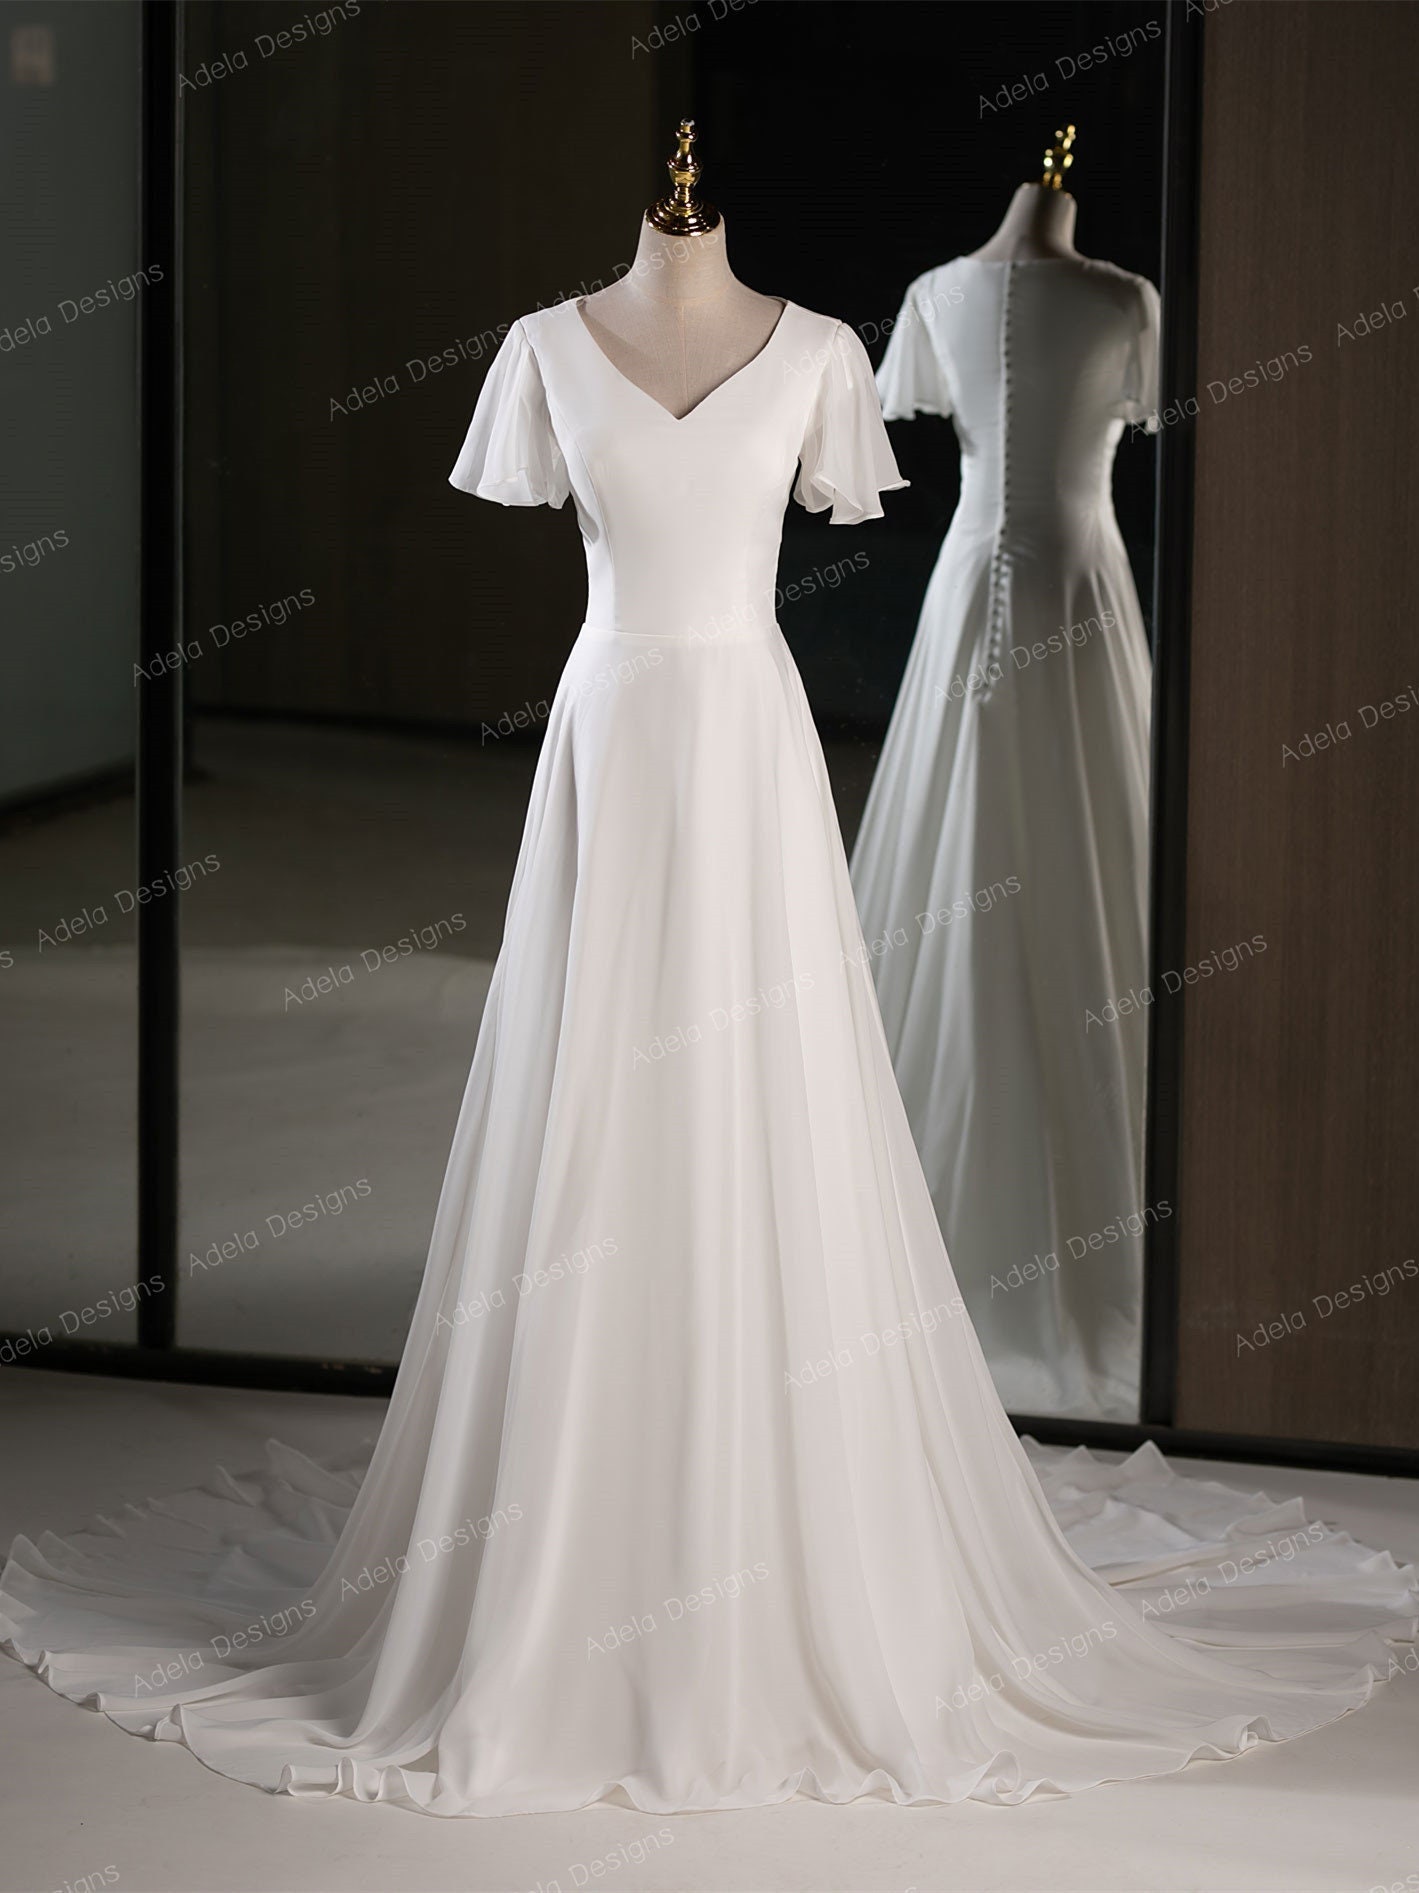 M5033 Short Sleeve Chiffon and Lace Bodice A-Line Modest Bridal Gown